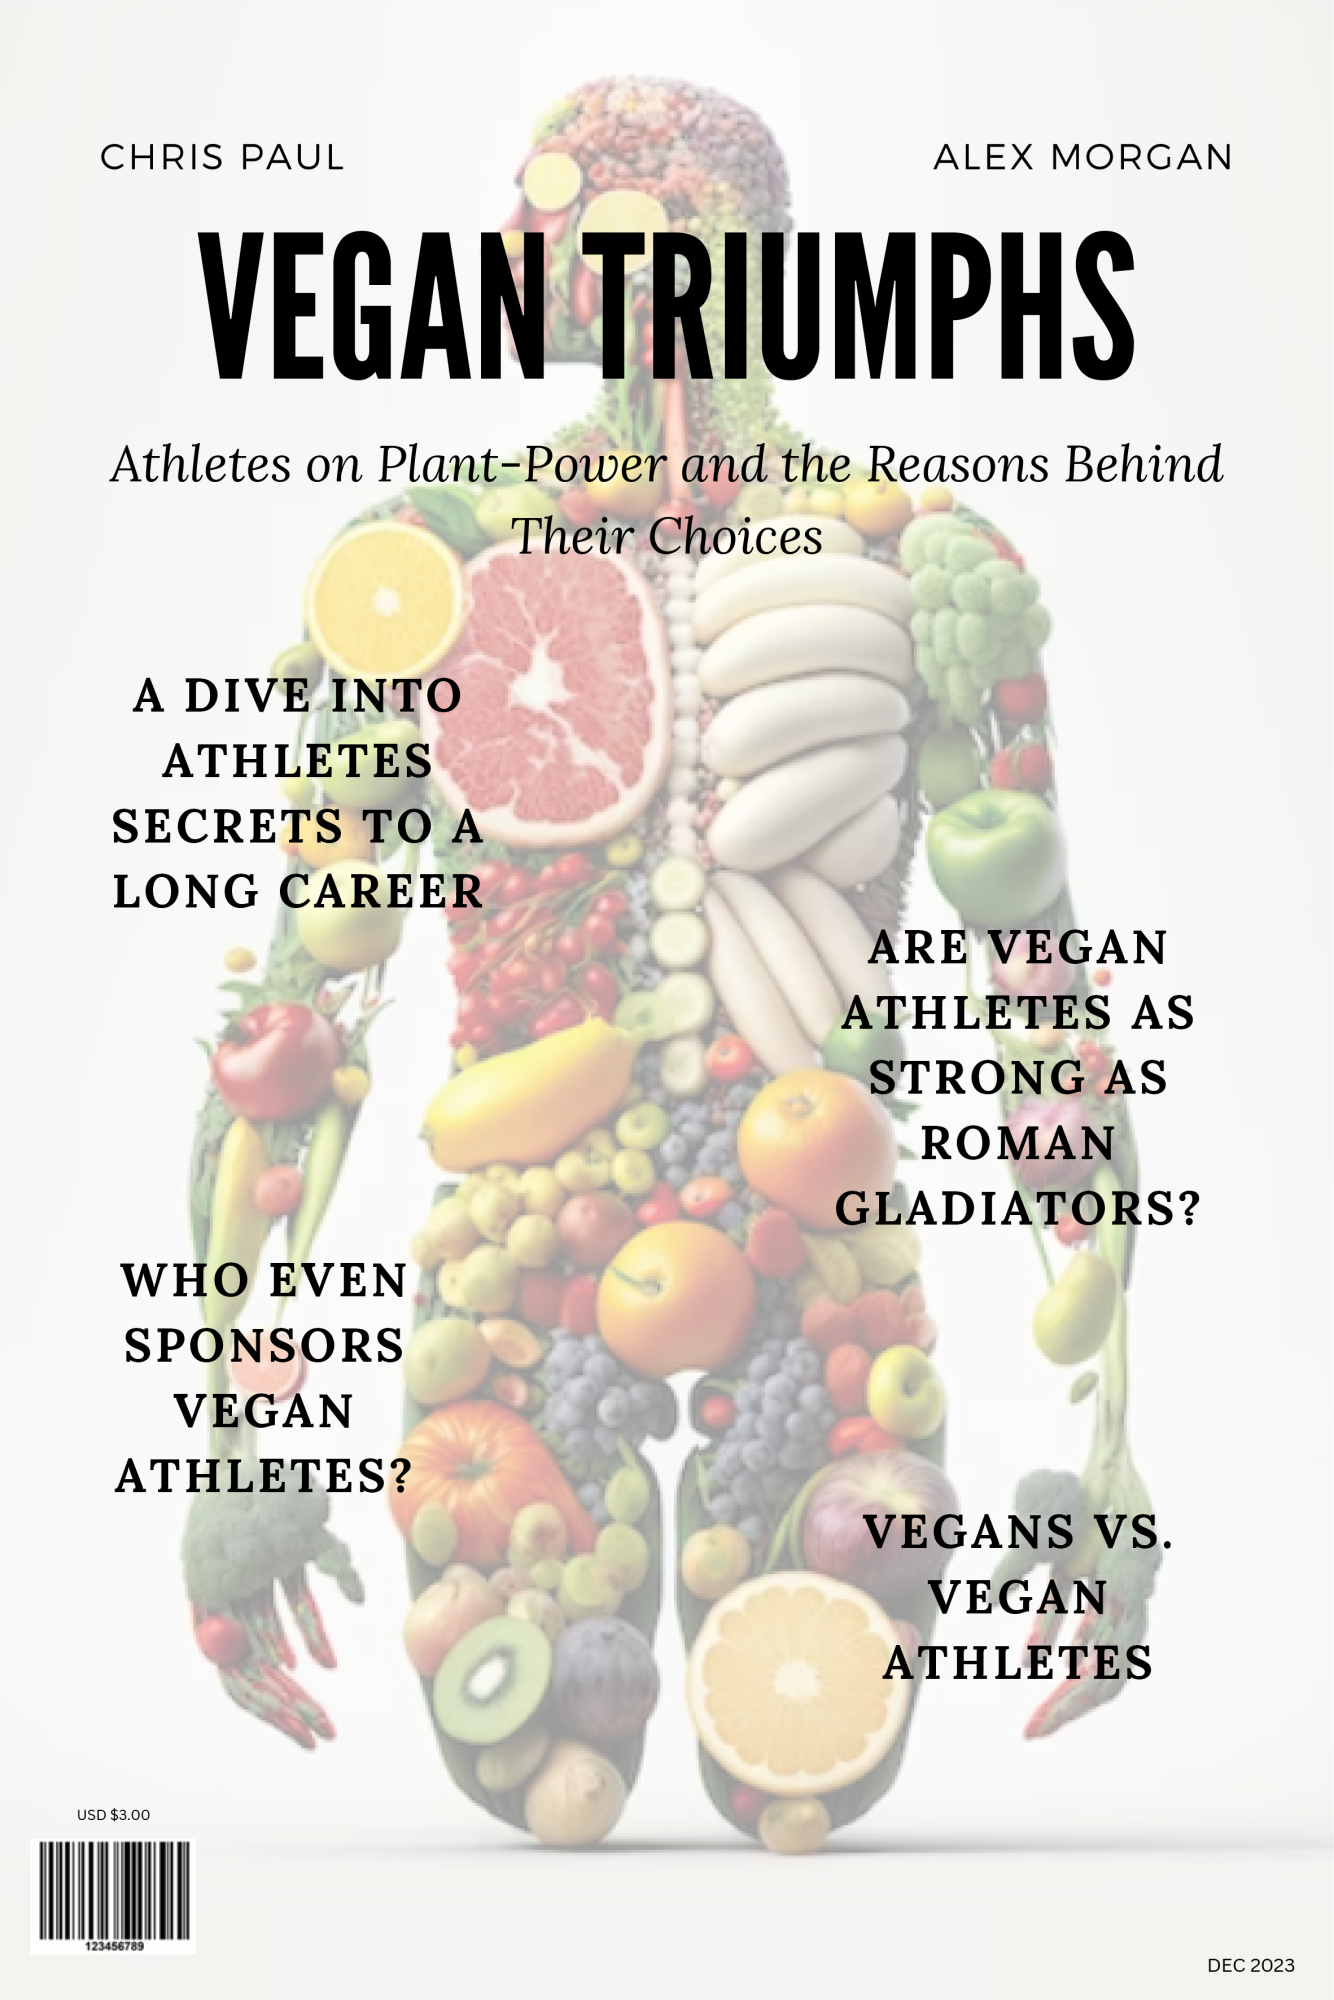 Cover of "Vegan Triumphs" with a human body outline filled with nutritious food created by Emma Meyer